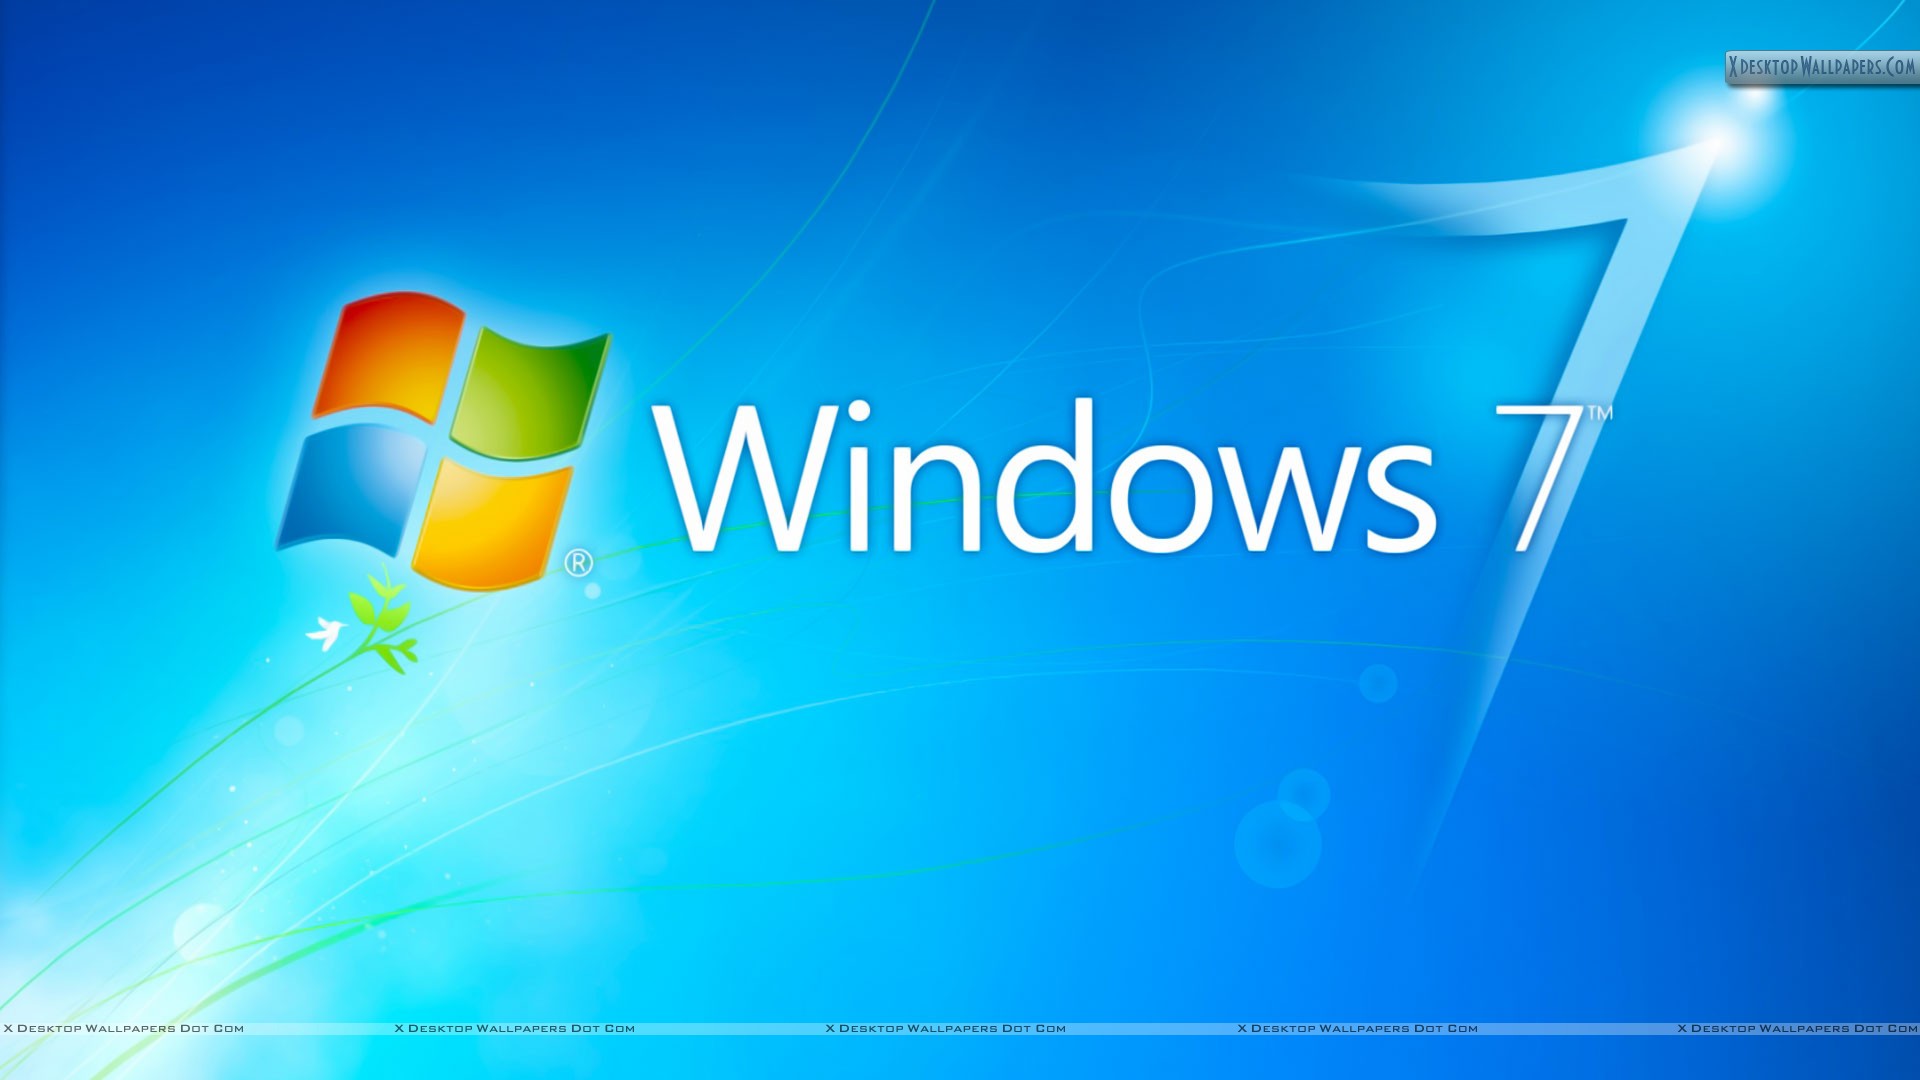 Free download windows hd blue background with logo wallpaper x for your desktop mobile tablet explore windows blue background windows backgrounds windows wallpapers microsoft windows backgrounds